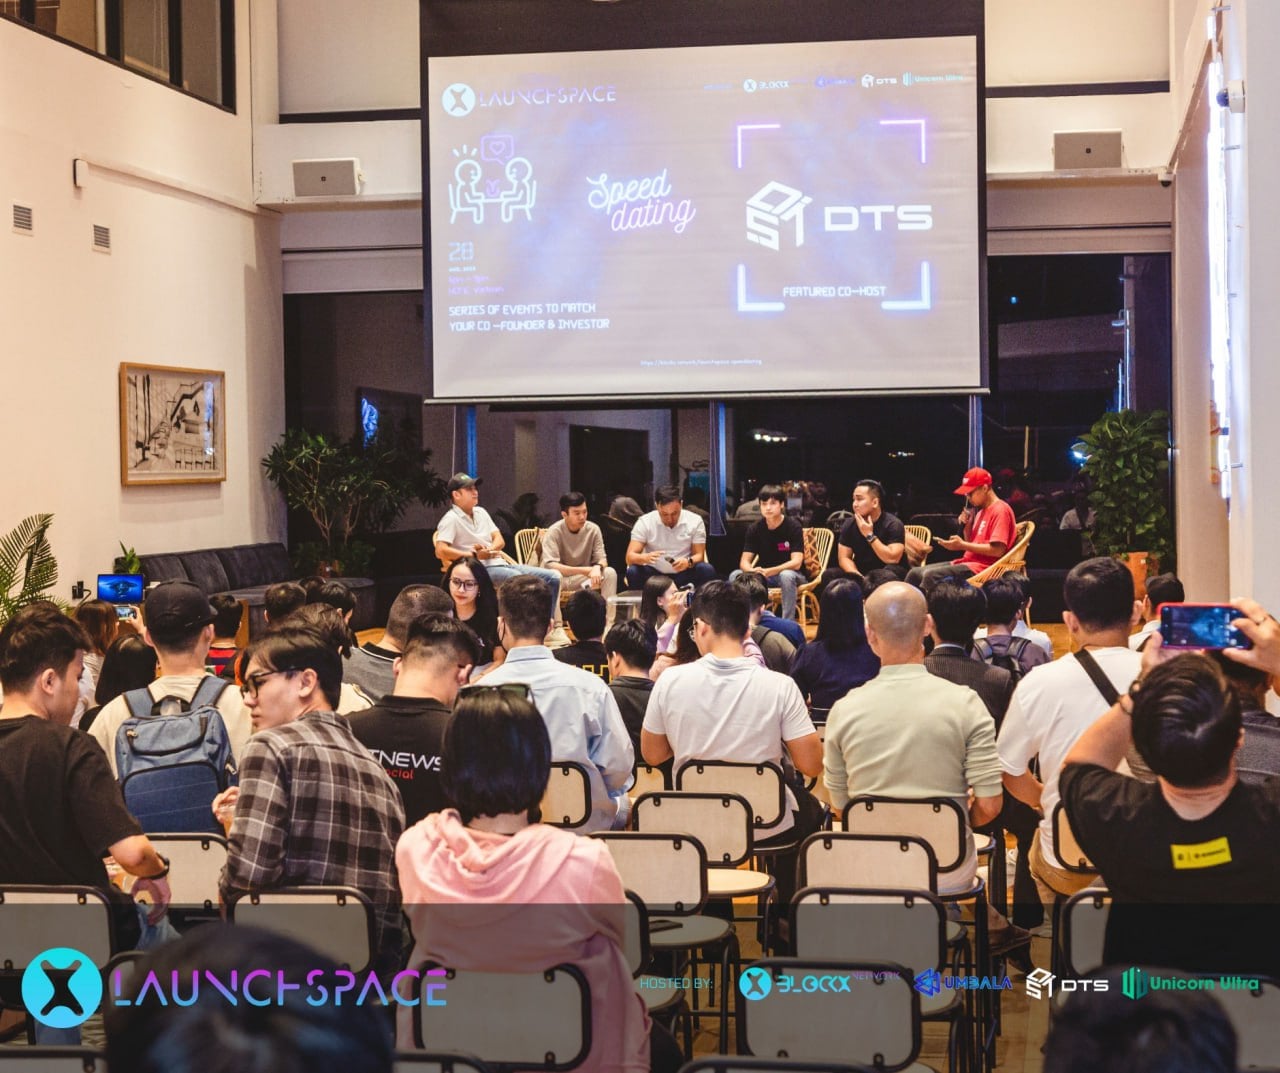 LAUNCHSPACE: CO-FOUNDER SPEED DATING